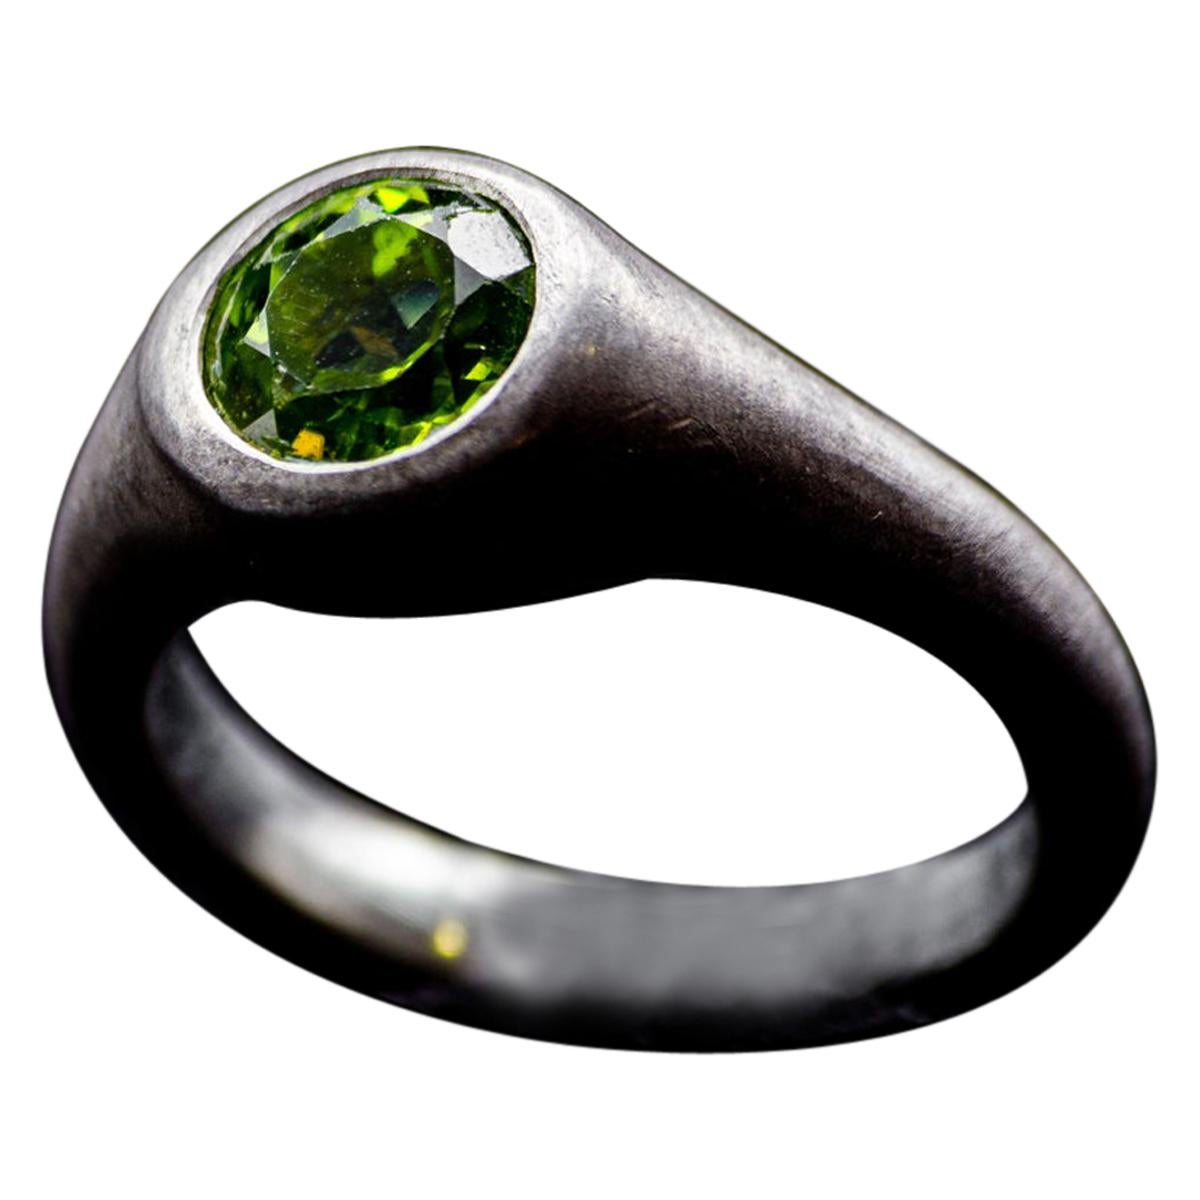 925 Silver Handmade Ring with Round Brilliant Cut Peridot